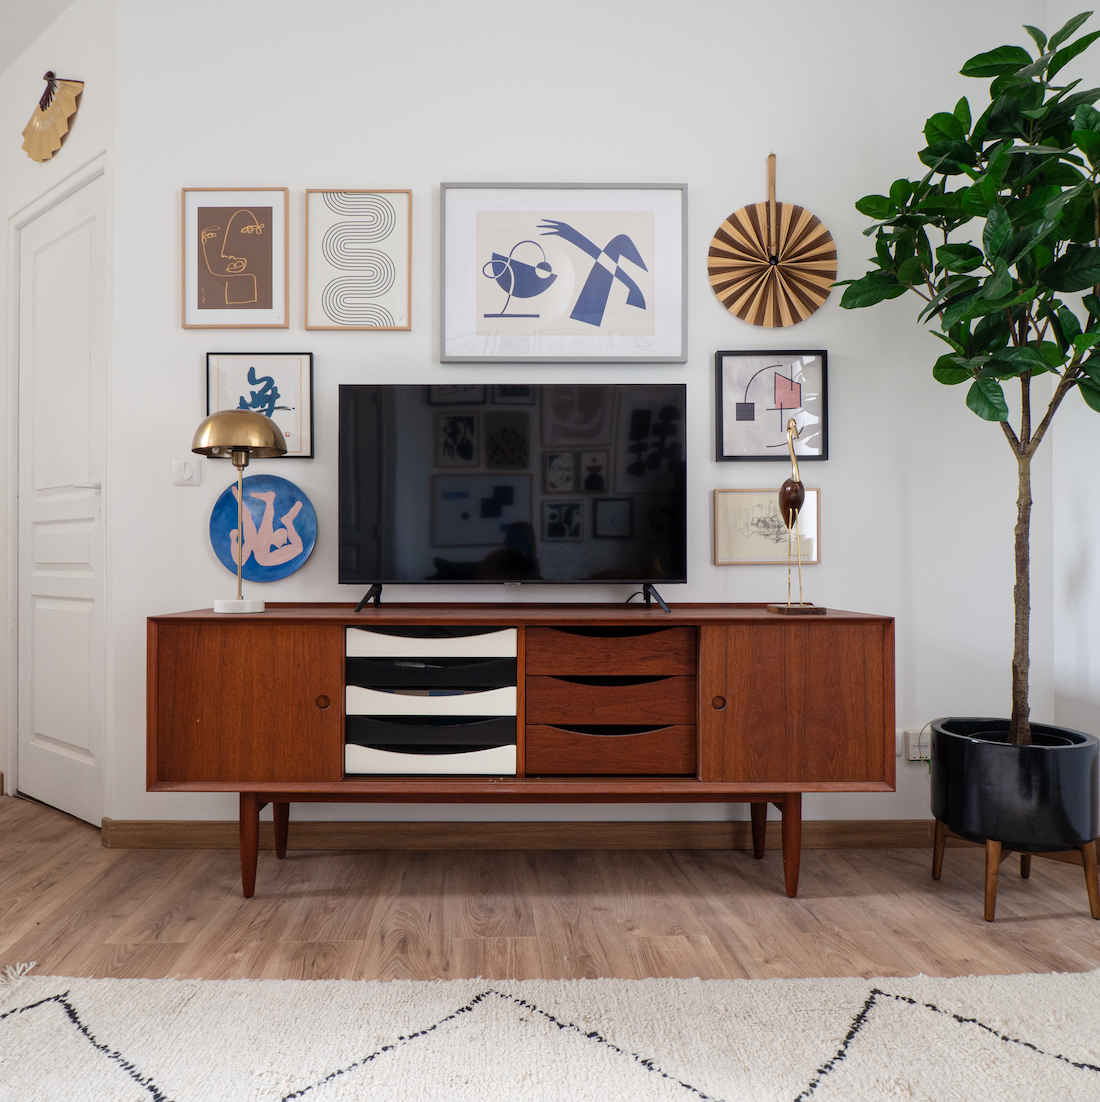 Vintage sideboard with graphic wall art by Aplotica Studio